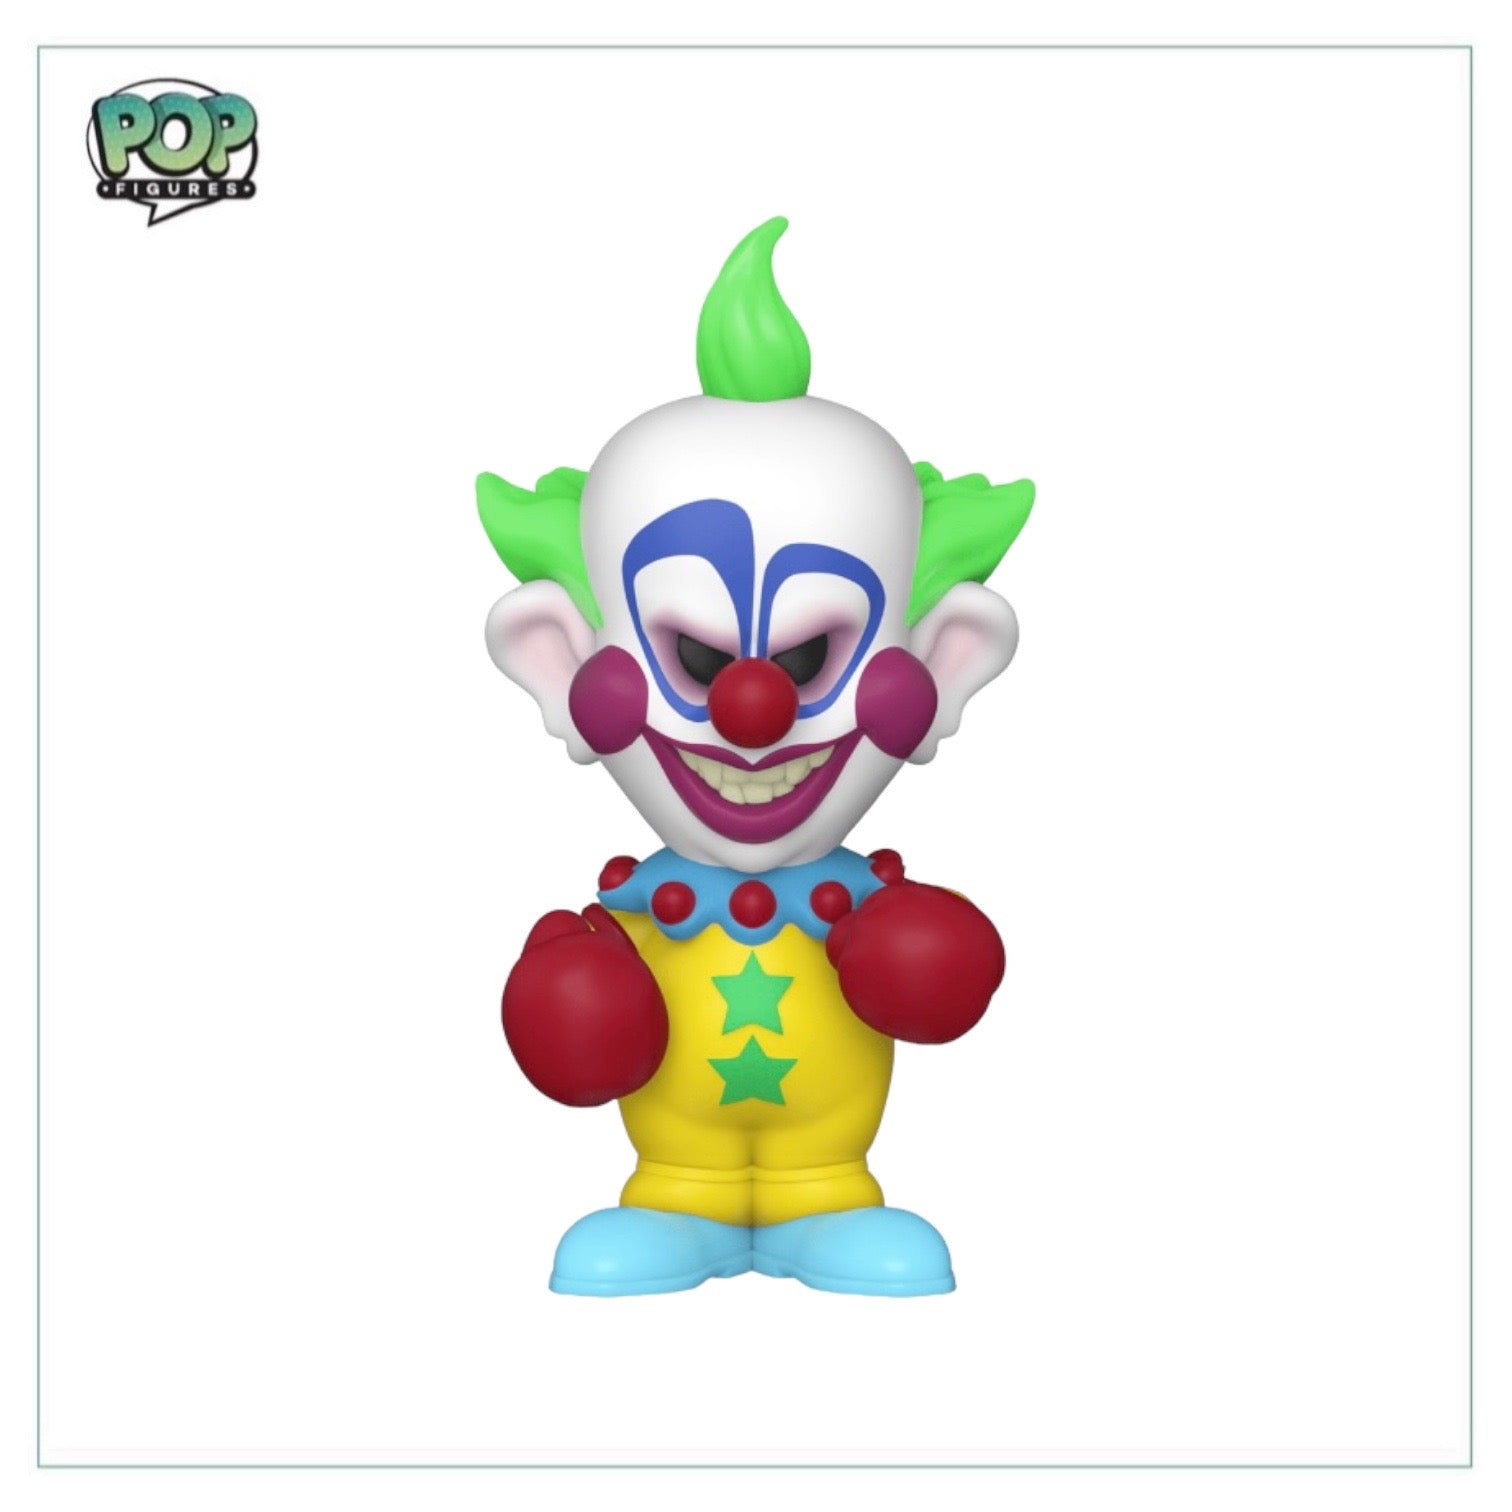 Shorty Funko Soda Vinyl Figure! - Killer Klowns from Outer Space - International LE5000 Pcs - Chance of Chase